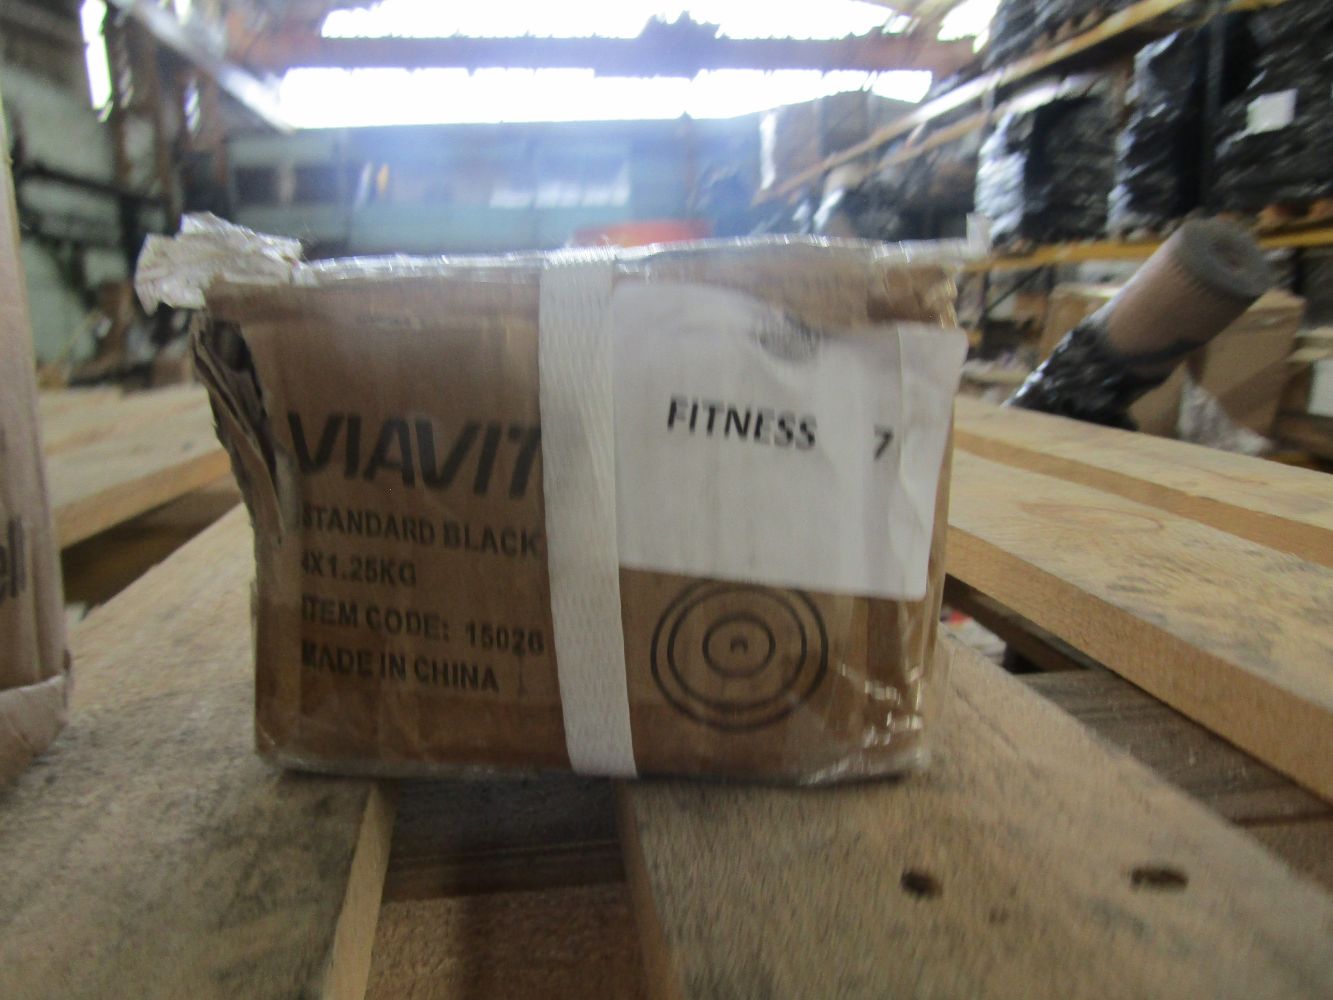 Fitness items in single and pallet lots.